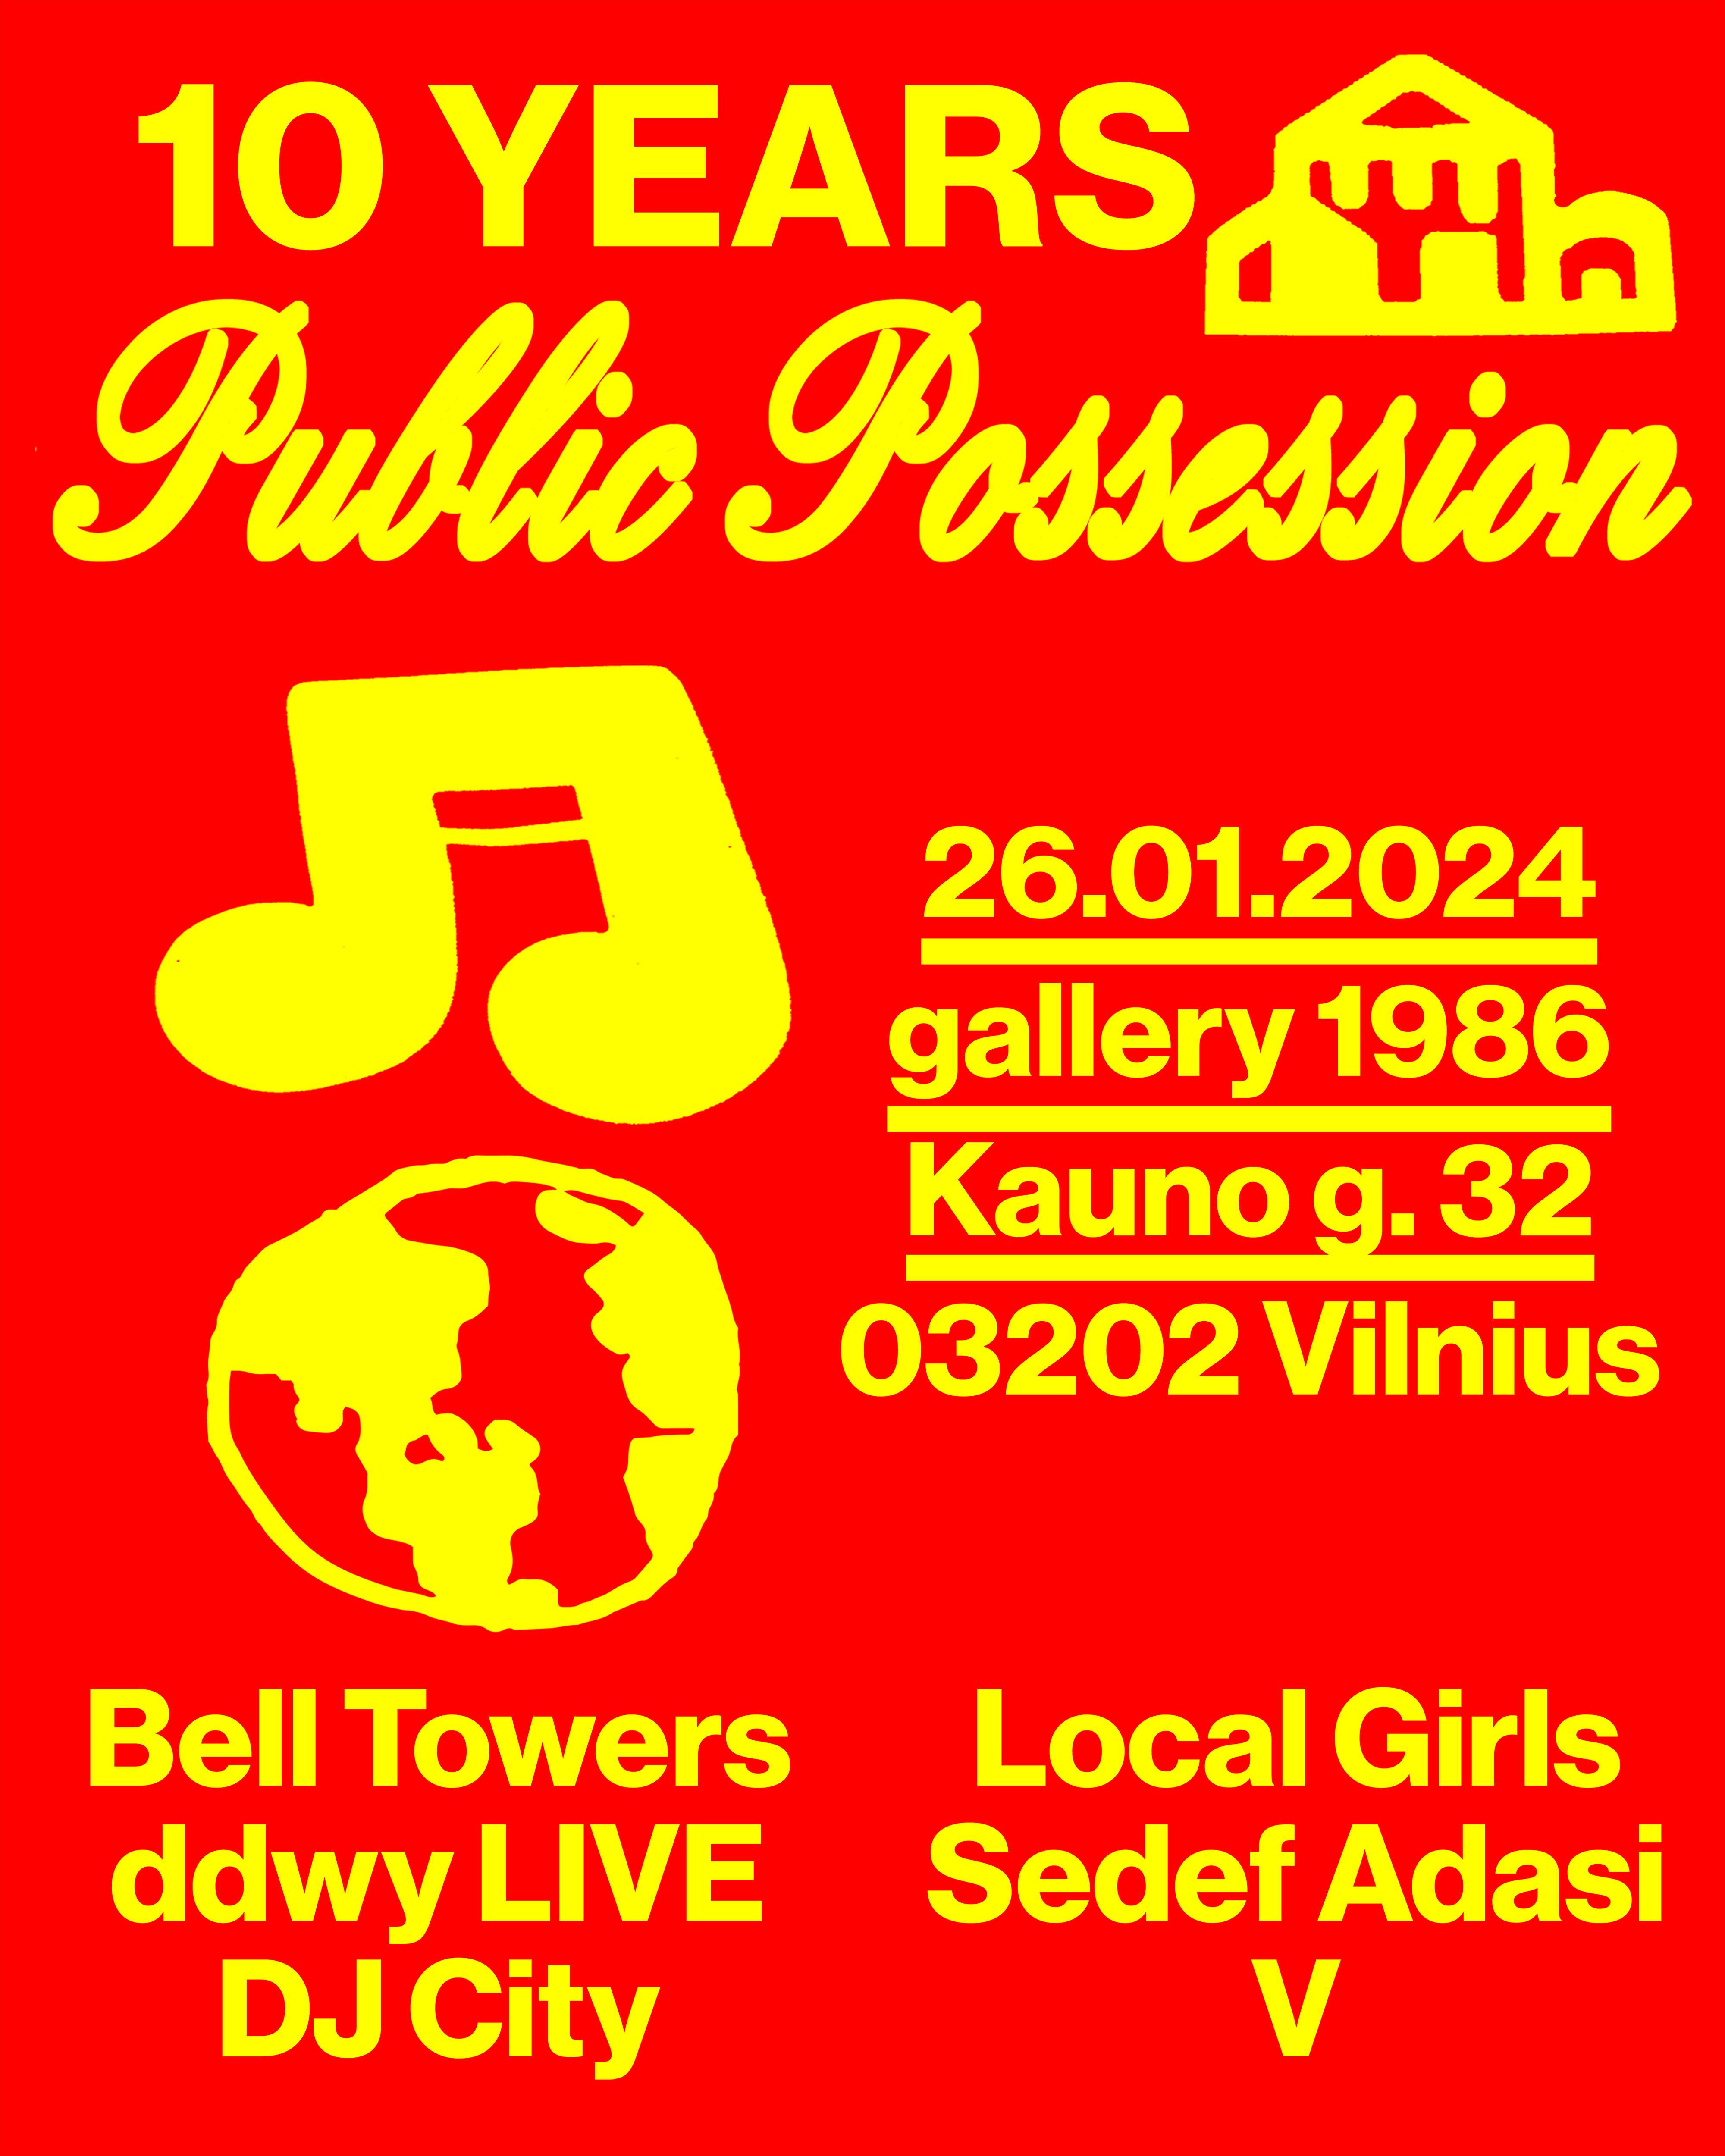 10 years of Public Possession: Bell Towers, ddwy LIVE, DJ City, Sedef Adasi, Local girls, V - フライヤー表